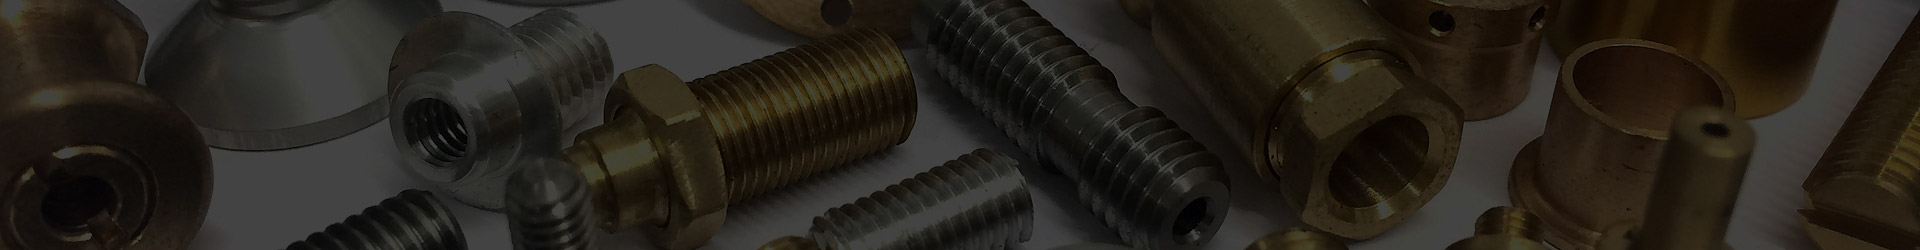 Brass Parts For Marine Industry